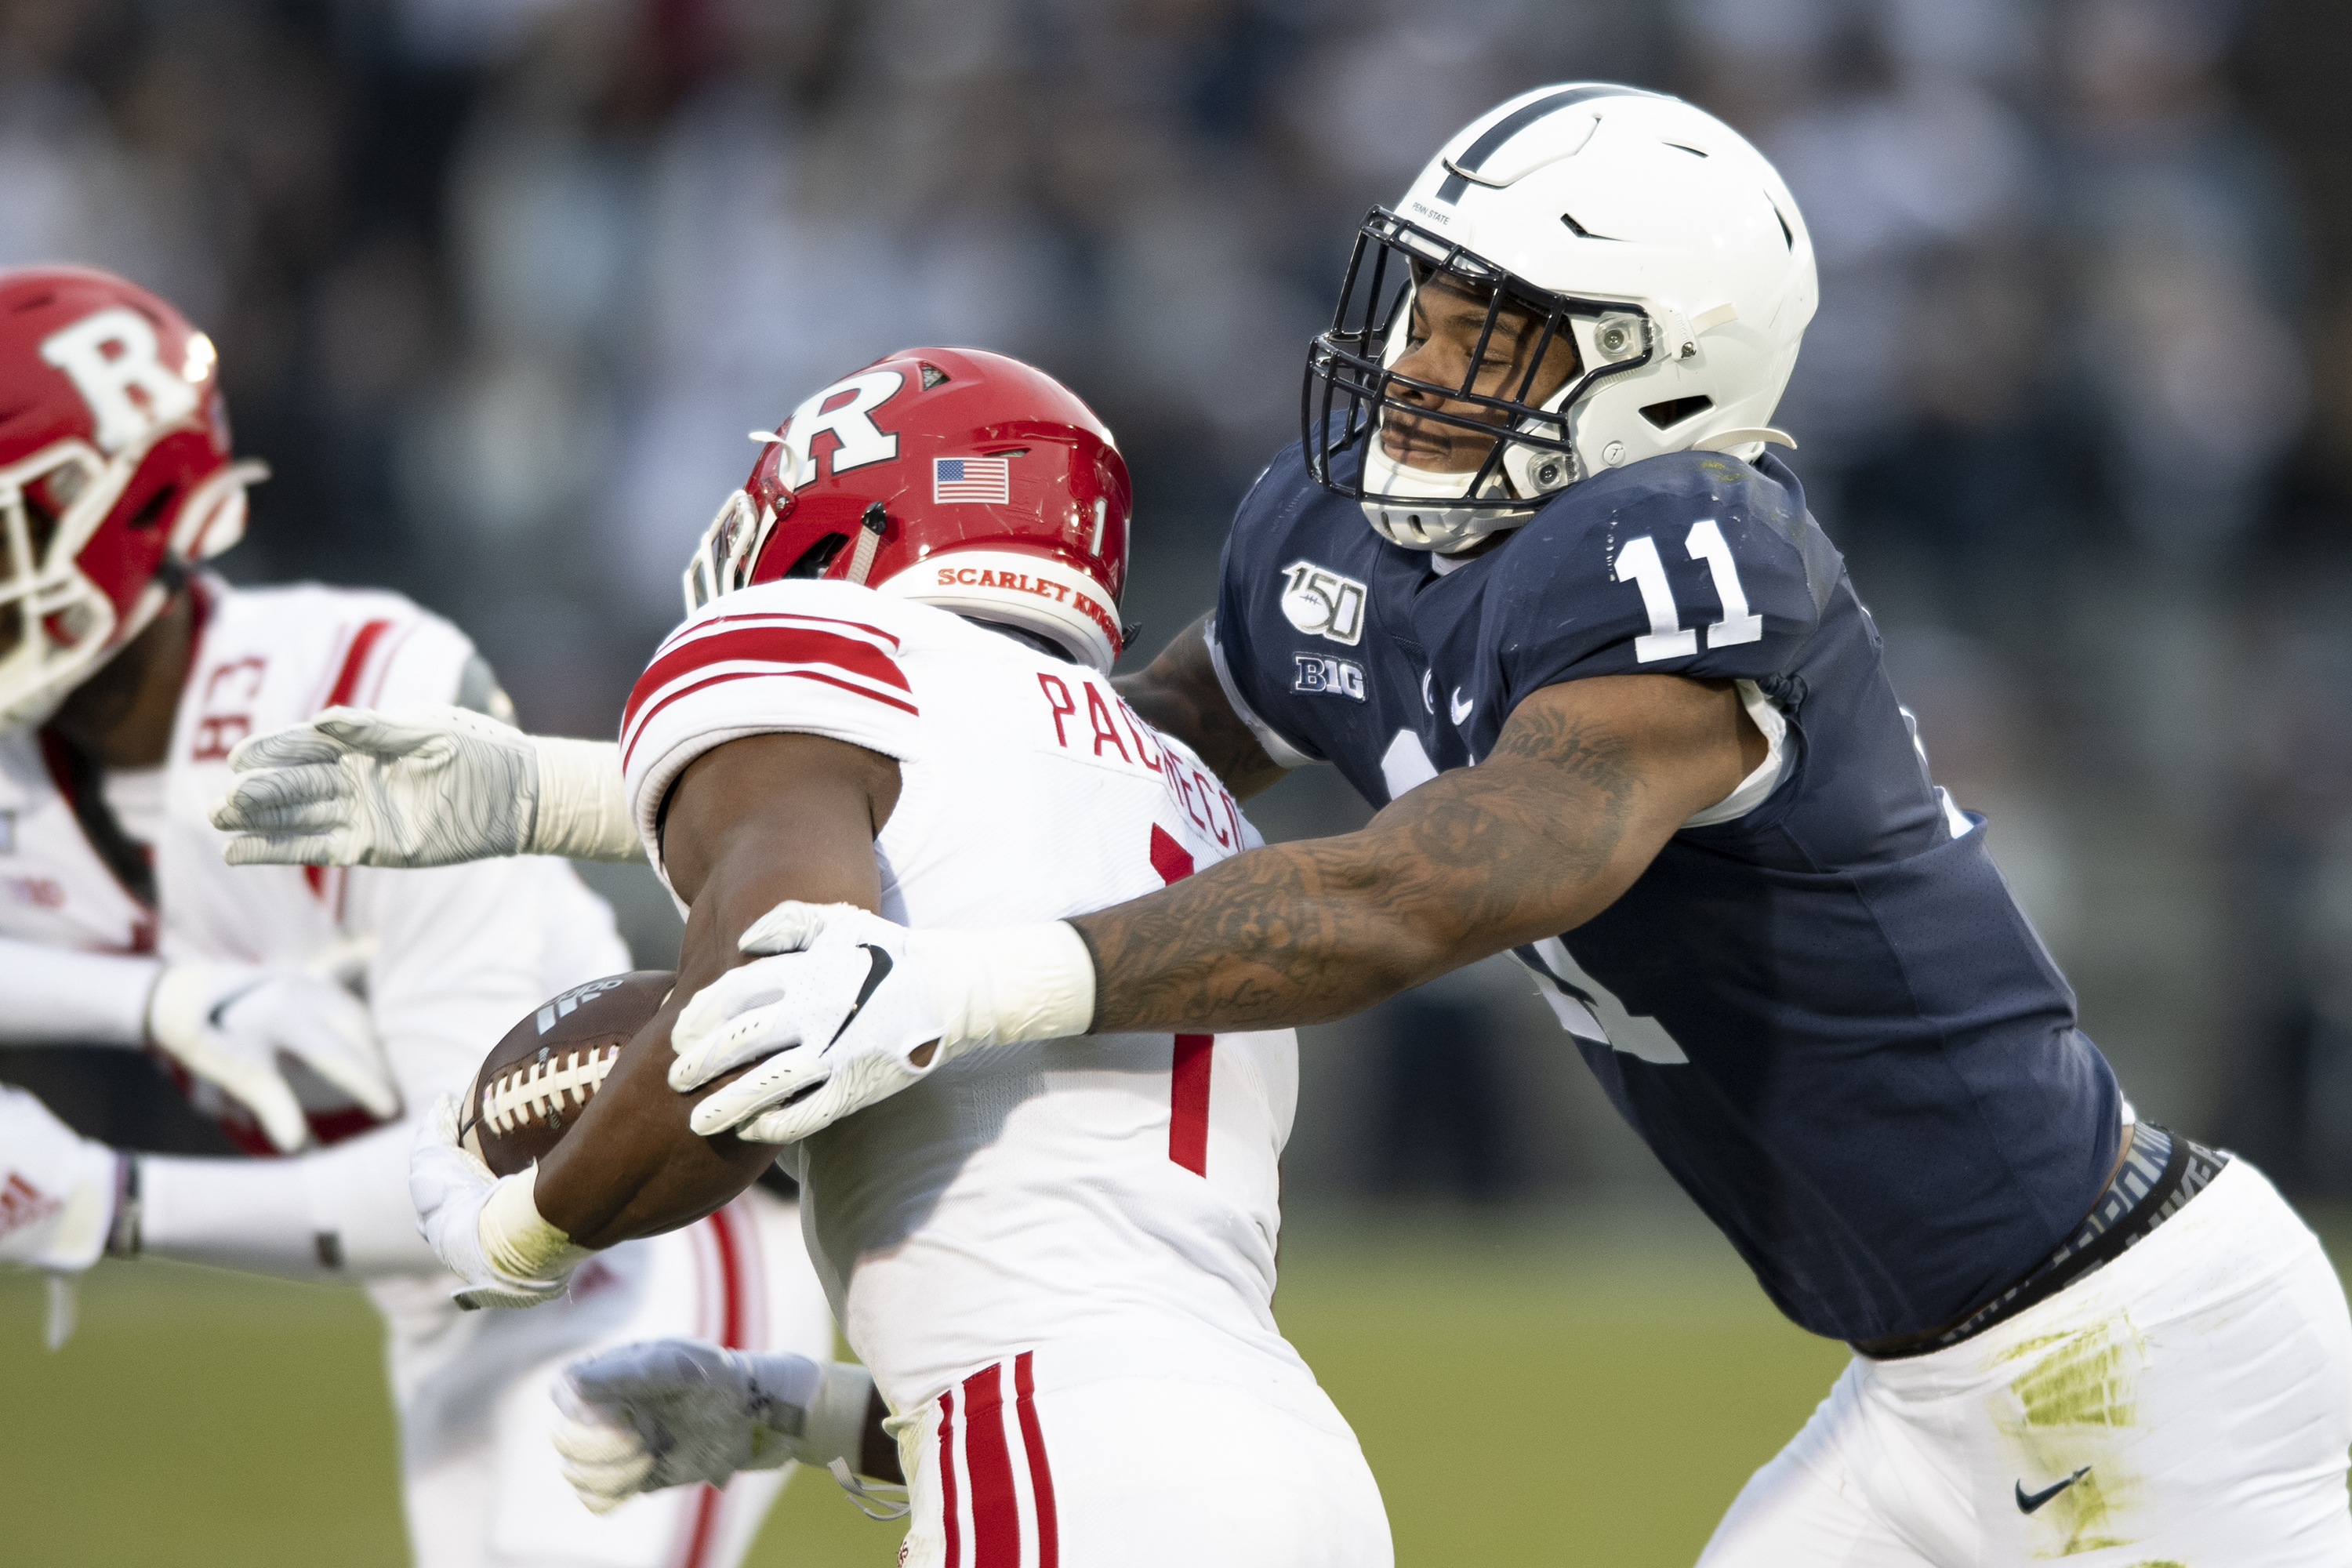 NFL Draft 2021: Penn State's Micah Parsons picked by Dallas Cowboys